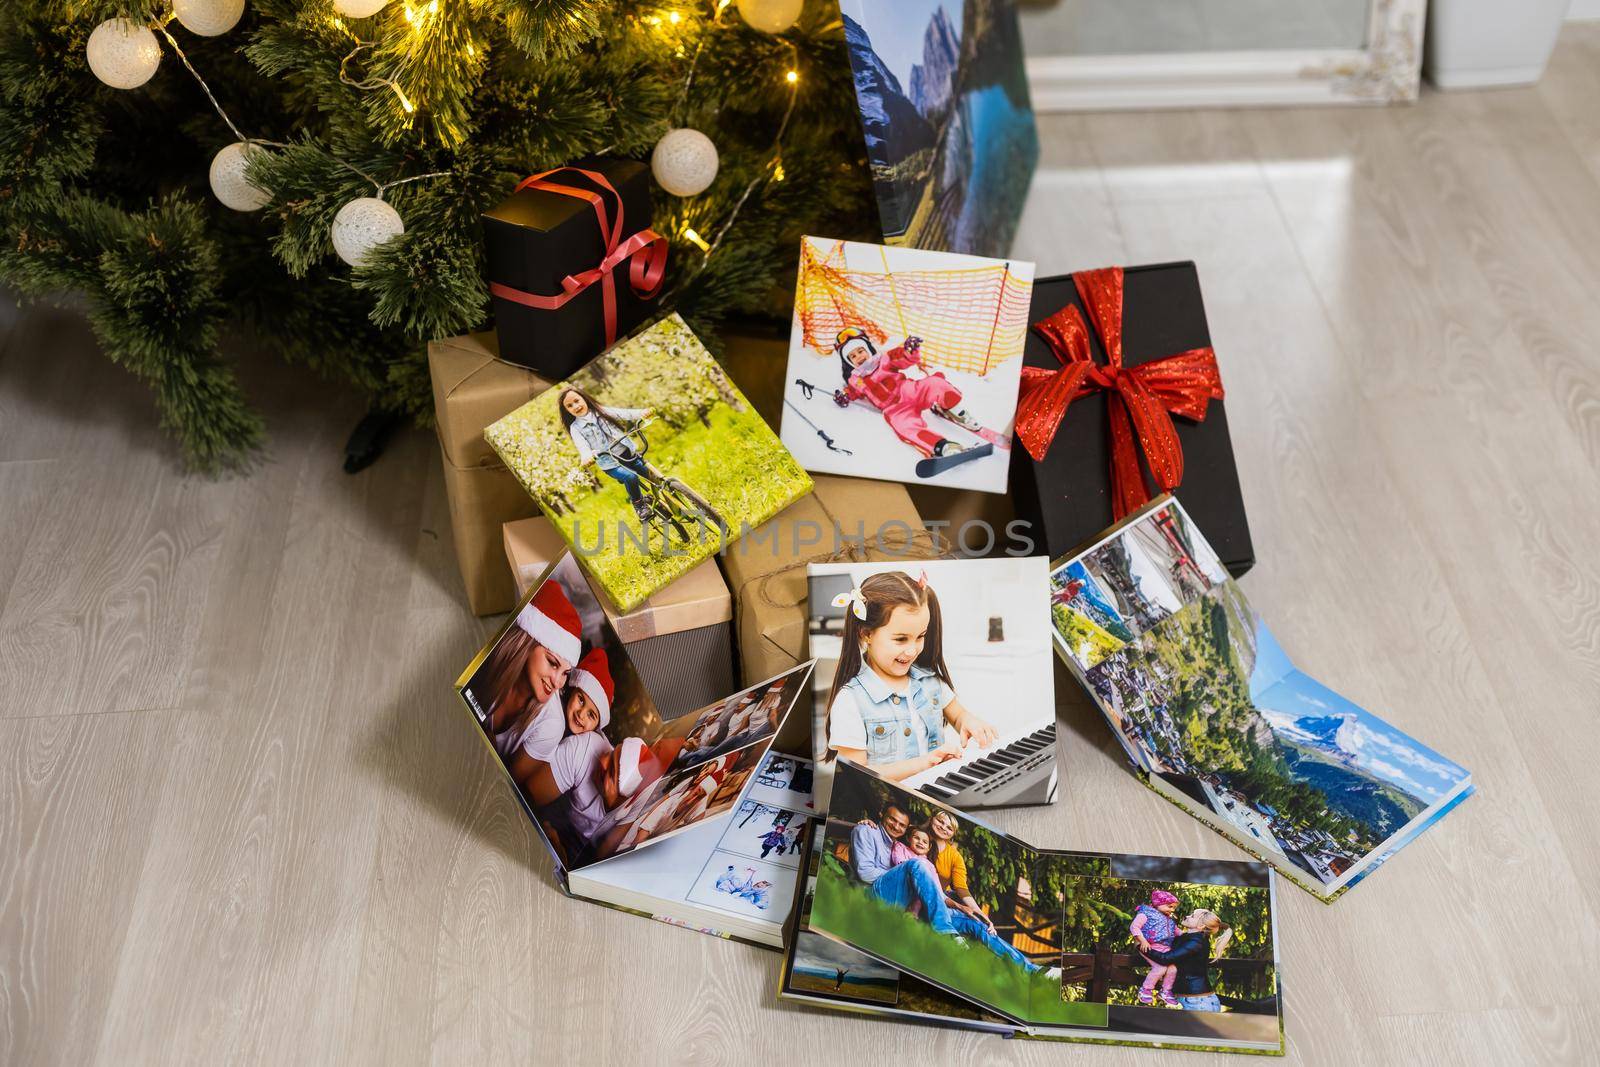 photobooks near the New Year tree, colored as a gift for the holiday